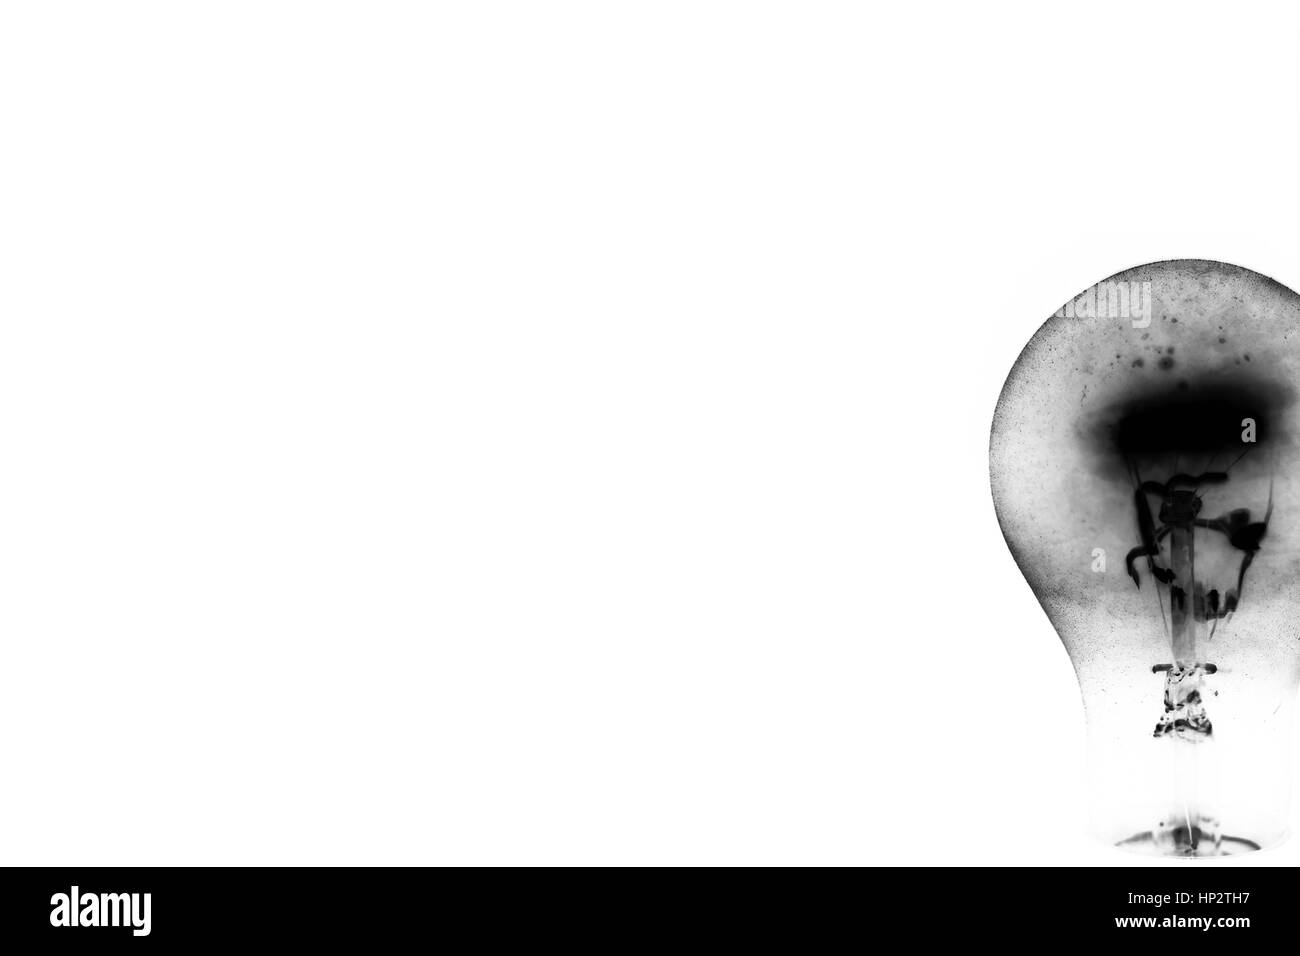 creative view of the light bulb in the form of a flower. art on white background monochrome Stock Photo